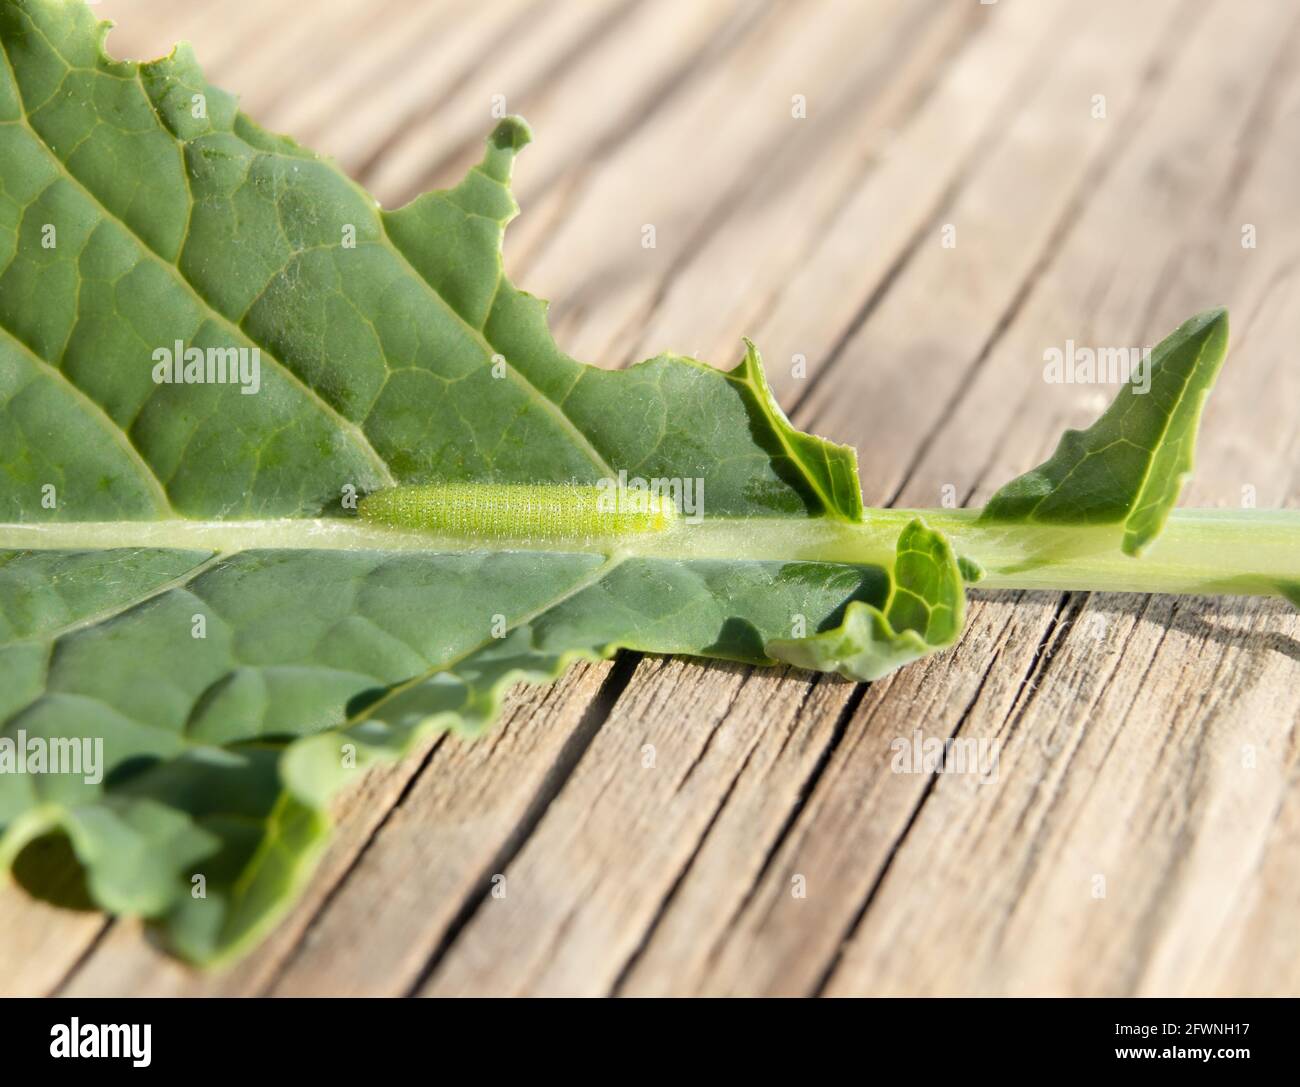 Larva of cabbage white butterfly, abbage butterfly or Pieris rapae. Macro of small 3-5 days old yellow green furry caterpillar or larva on kale leaf. Stock Photo